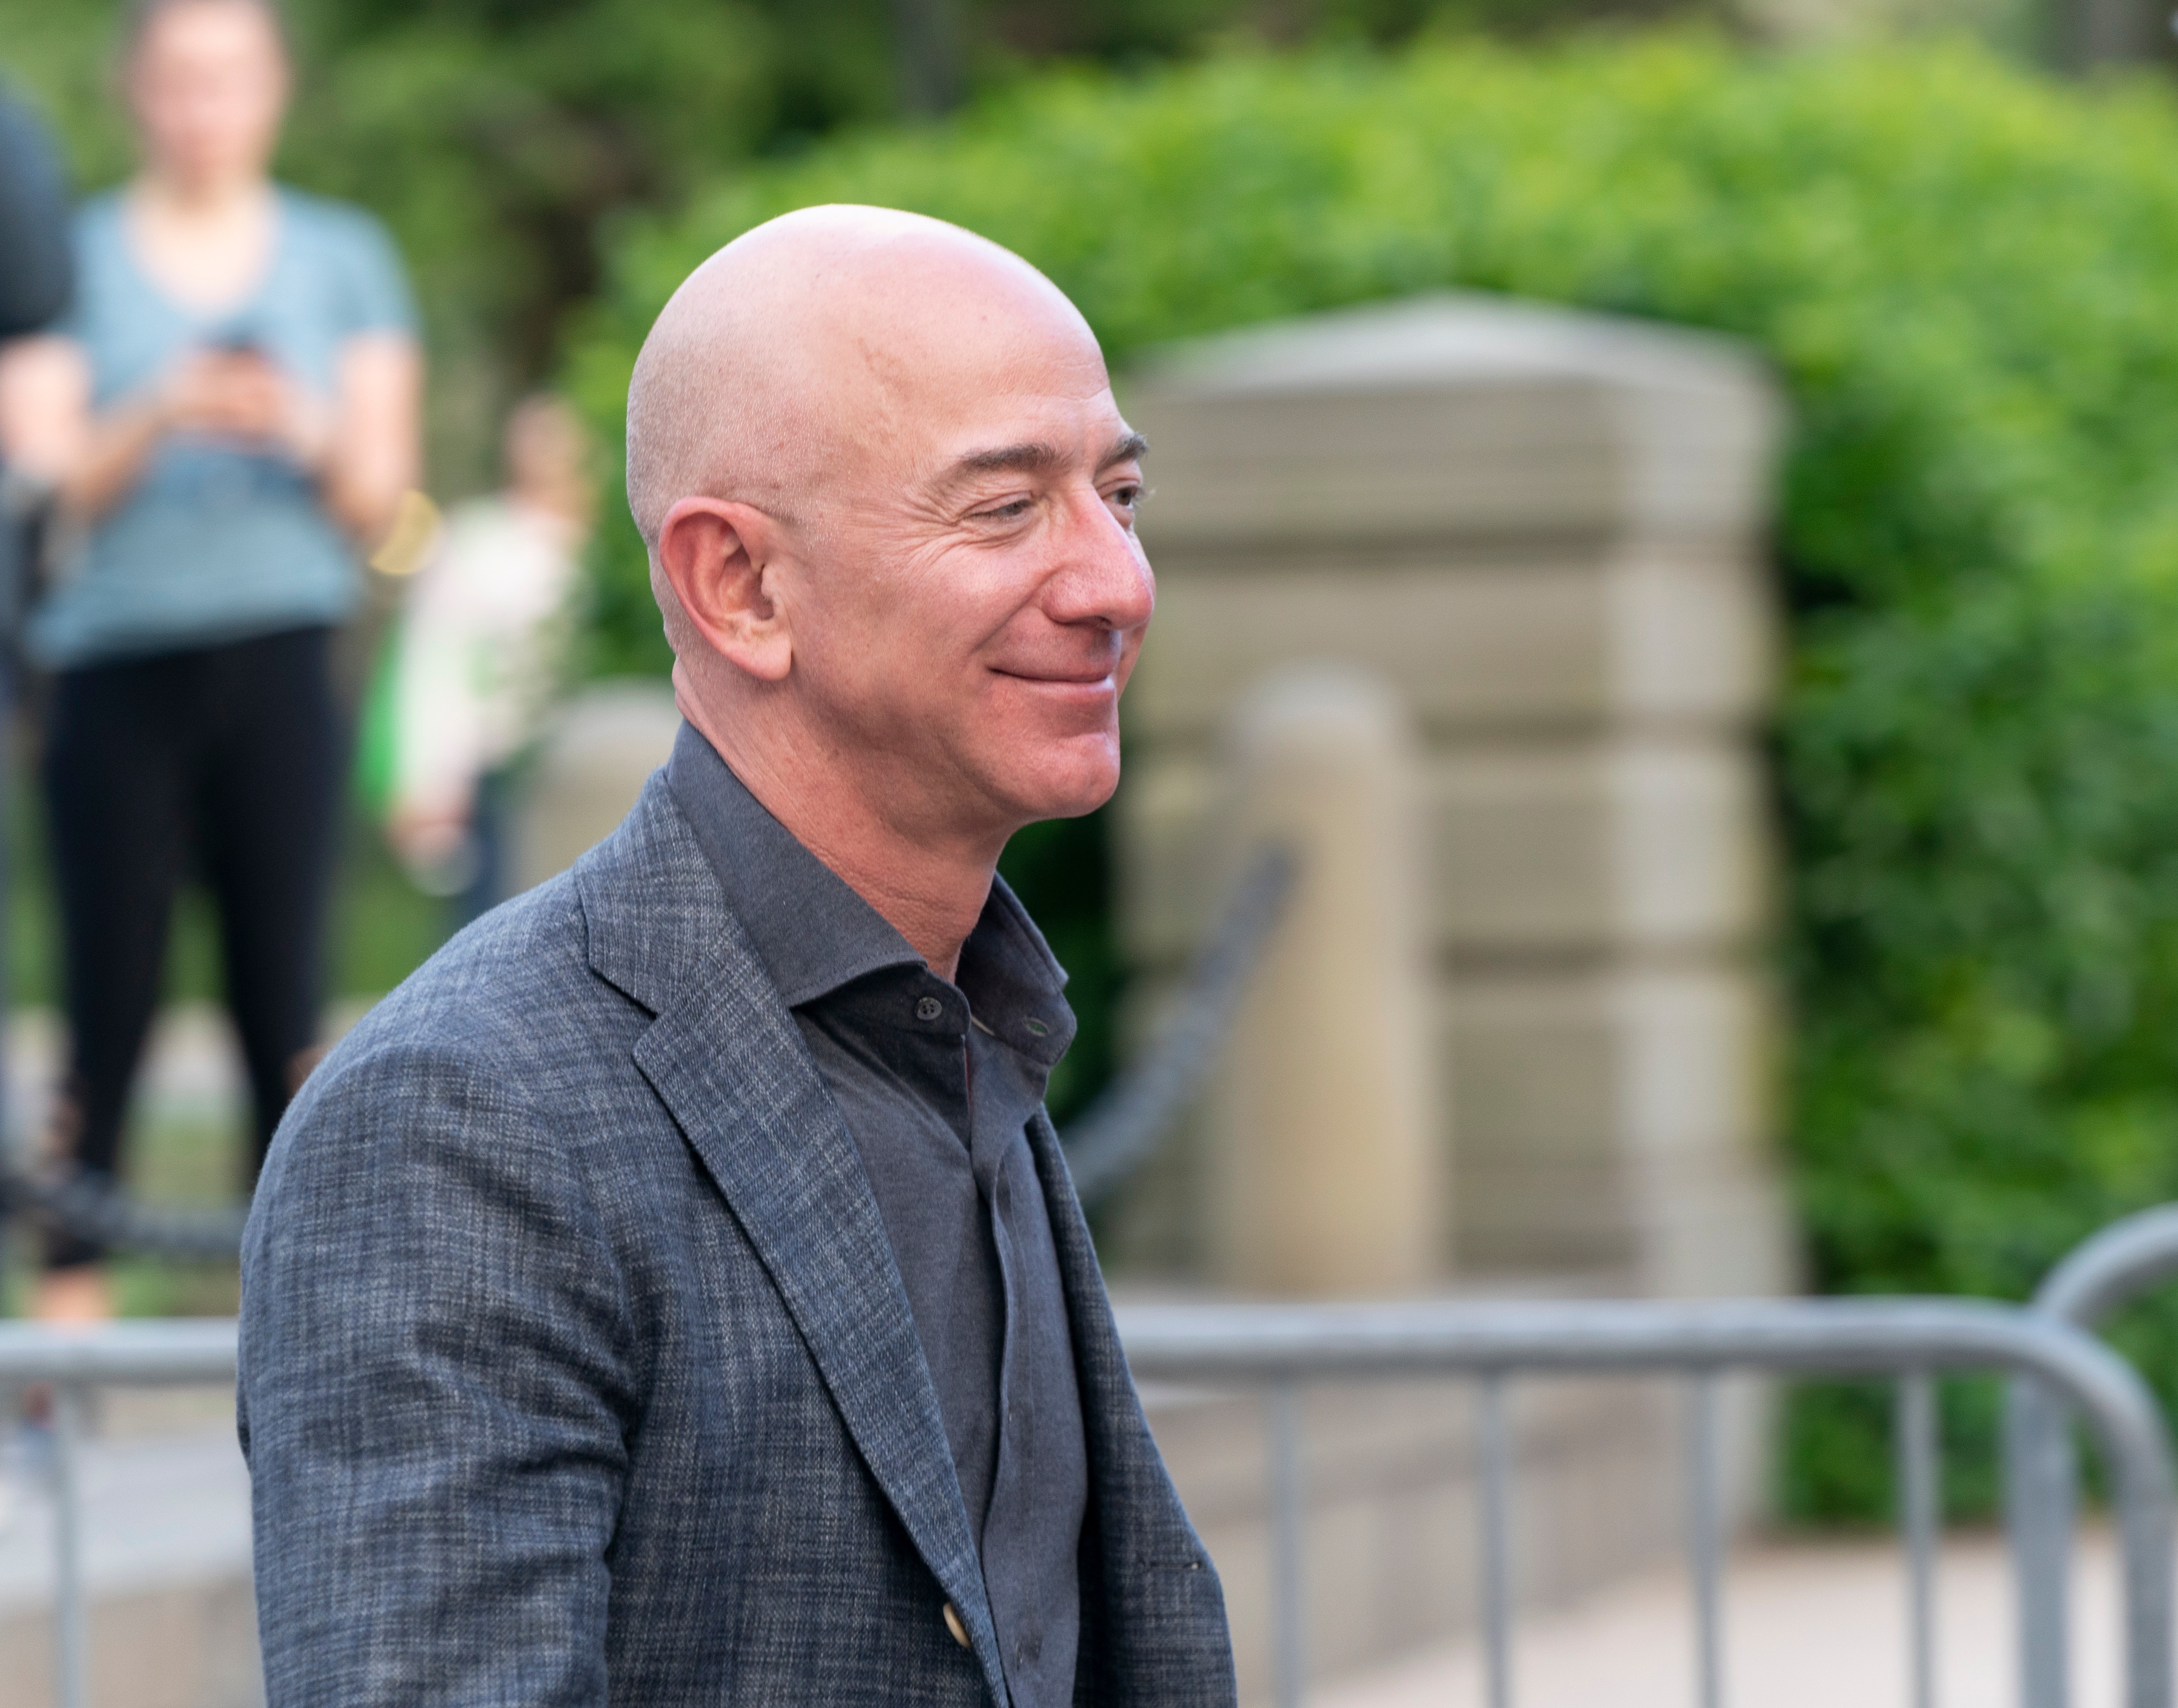 Amazon's Jeff Bezos Paid $3B With The Hope He'll Live Longer — Here's The Problem